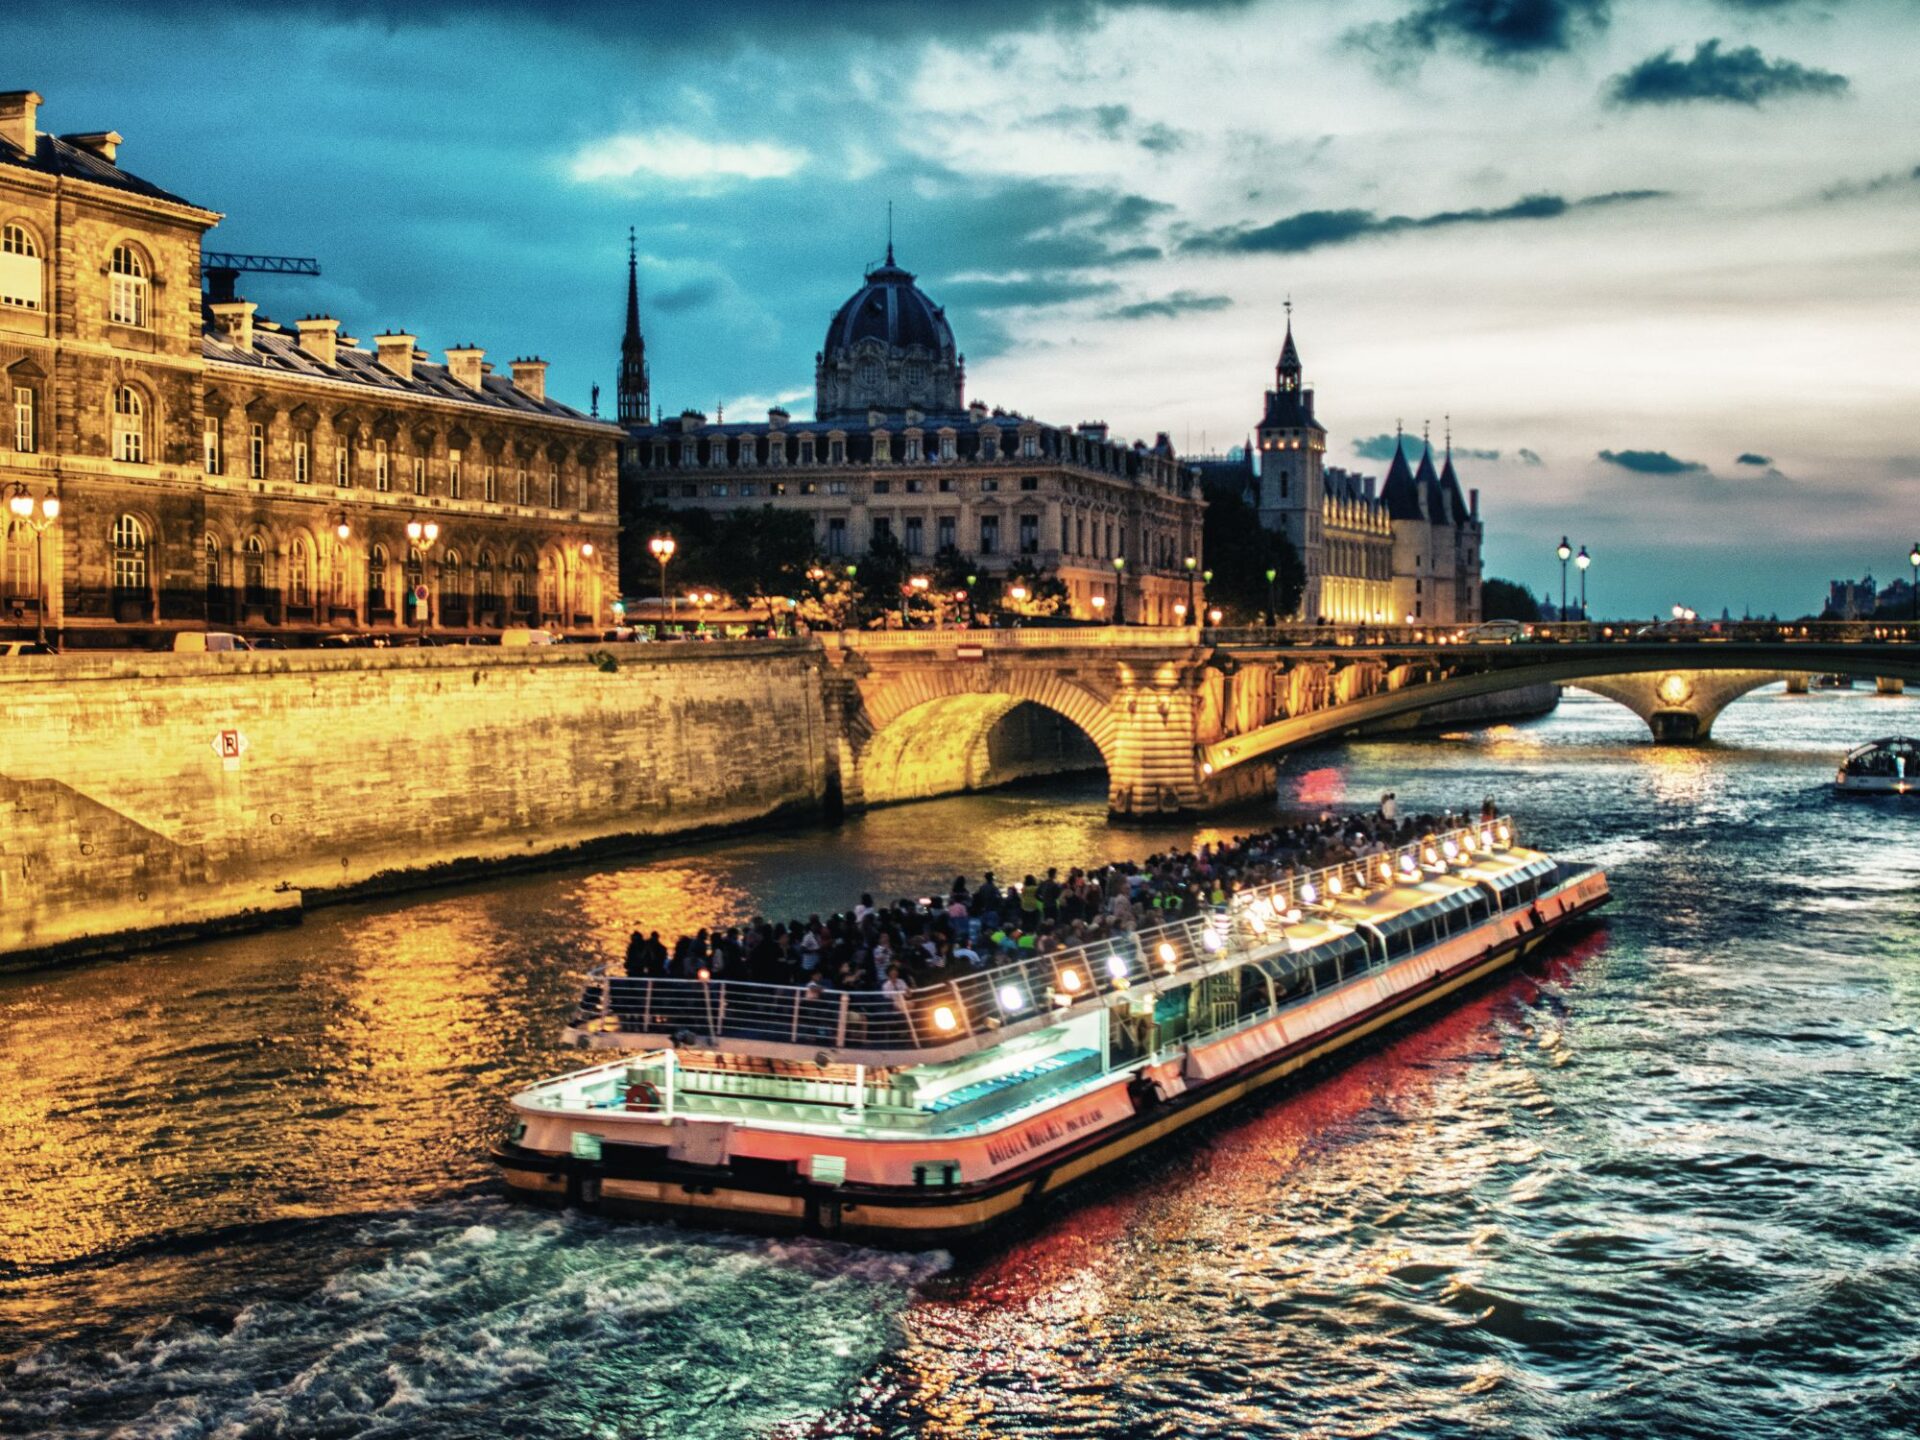 Things to do in Paris - Take a leisurely stroll along the seine river